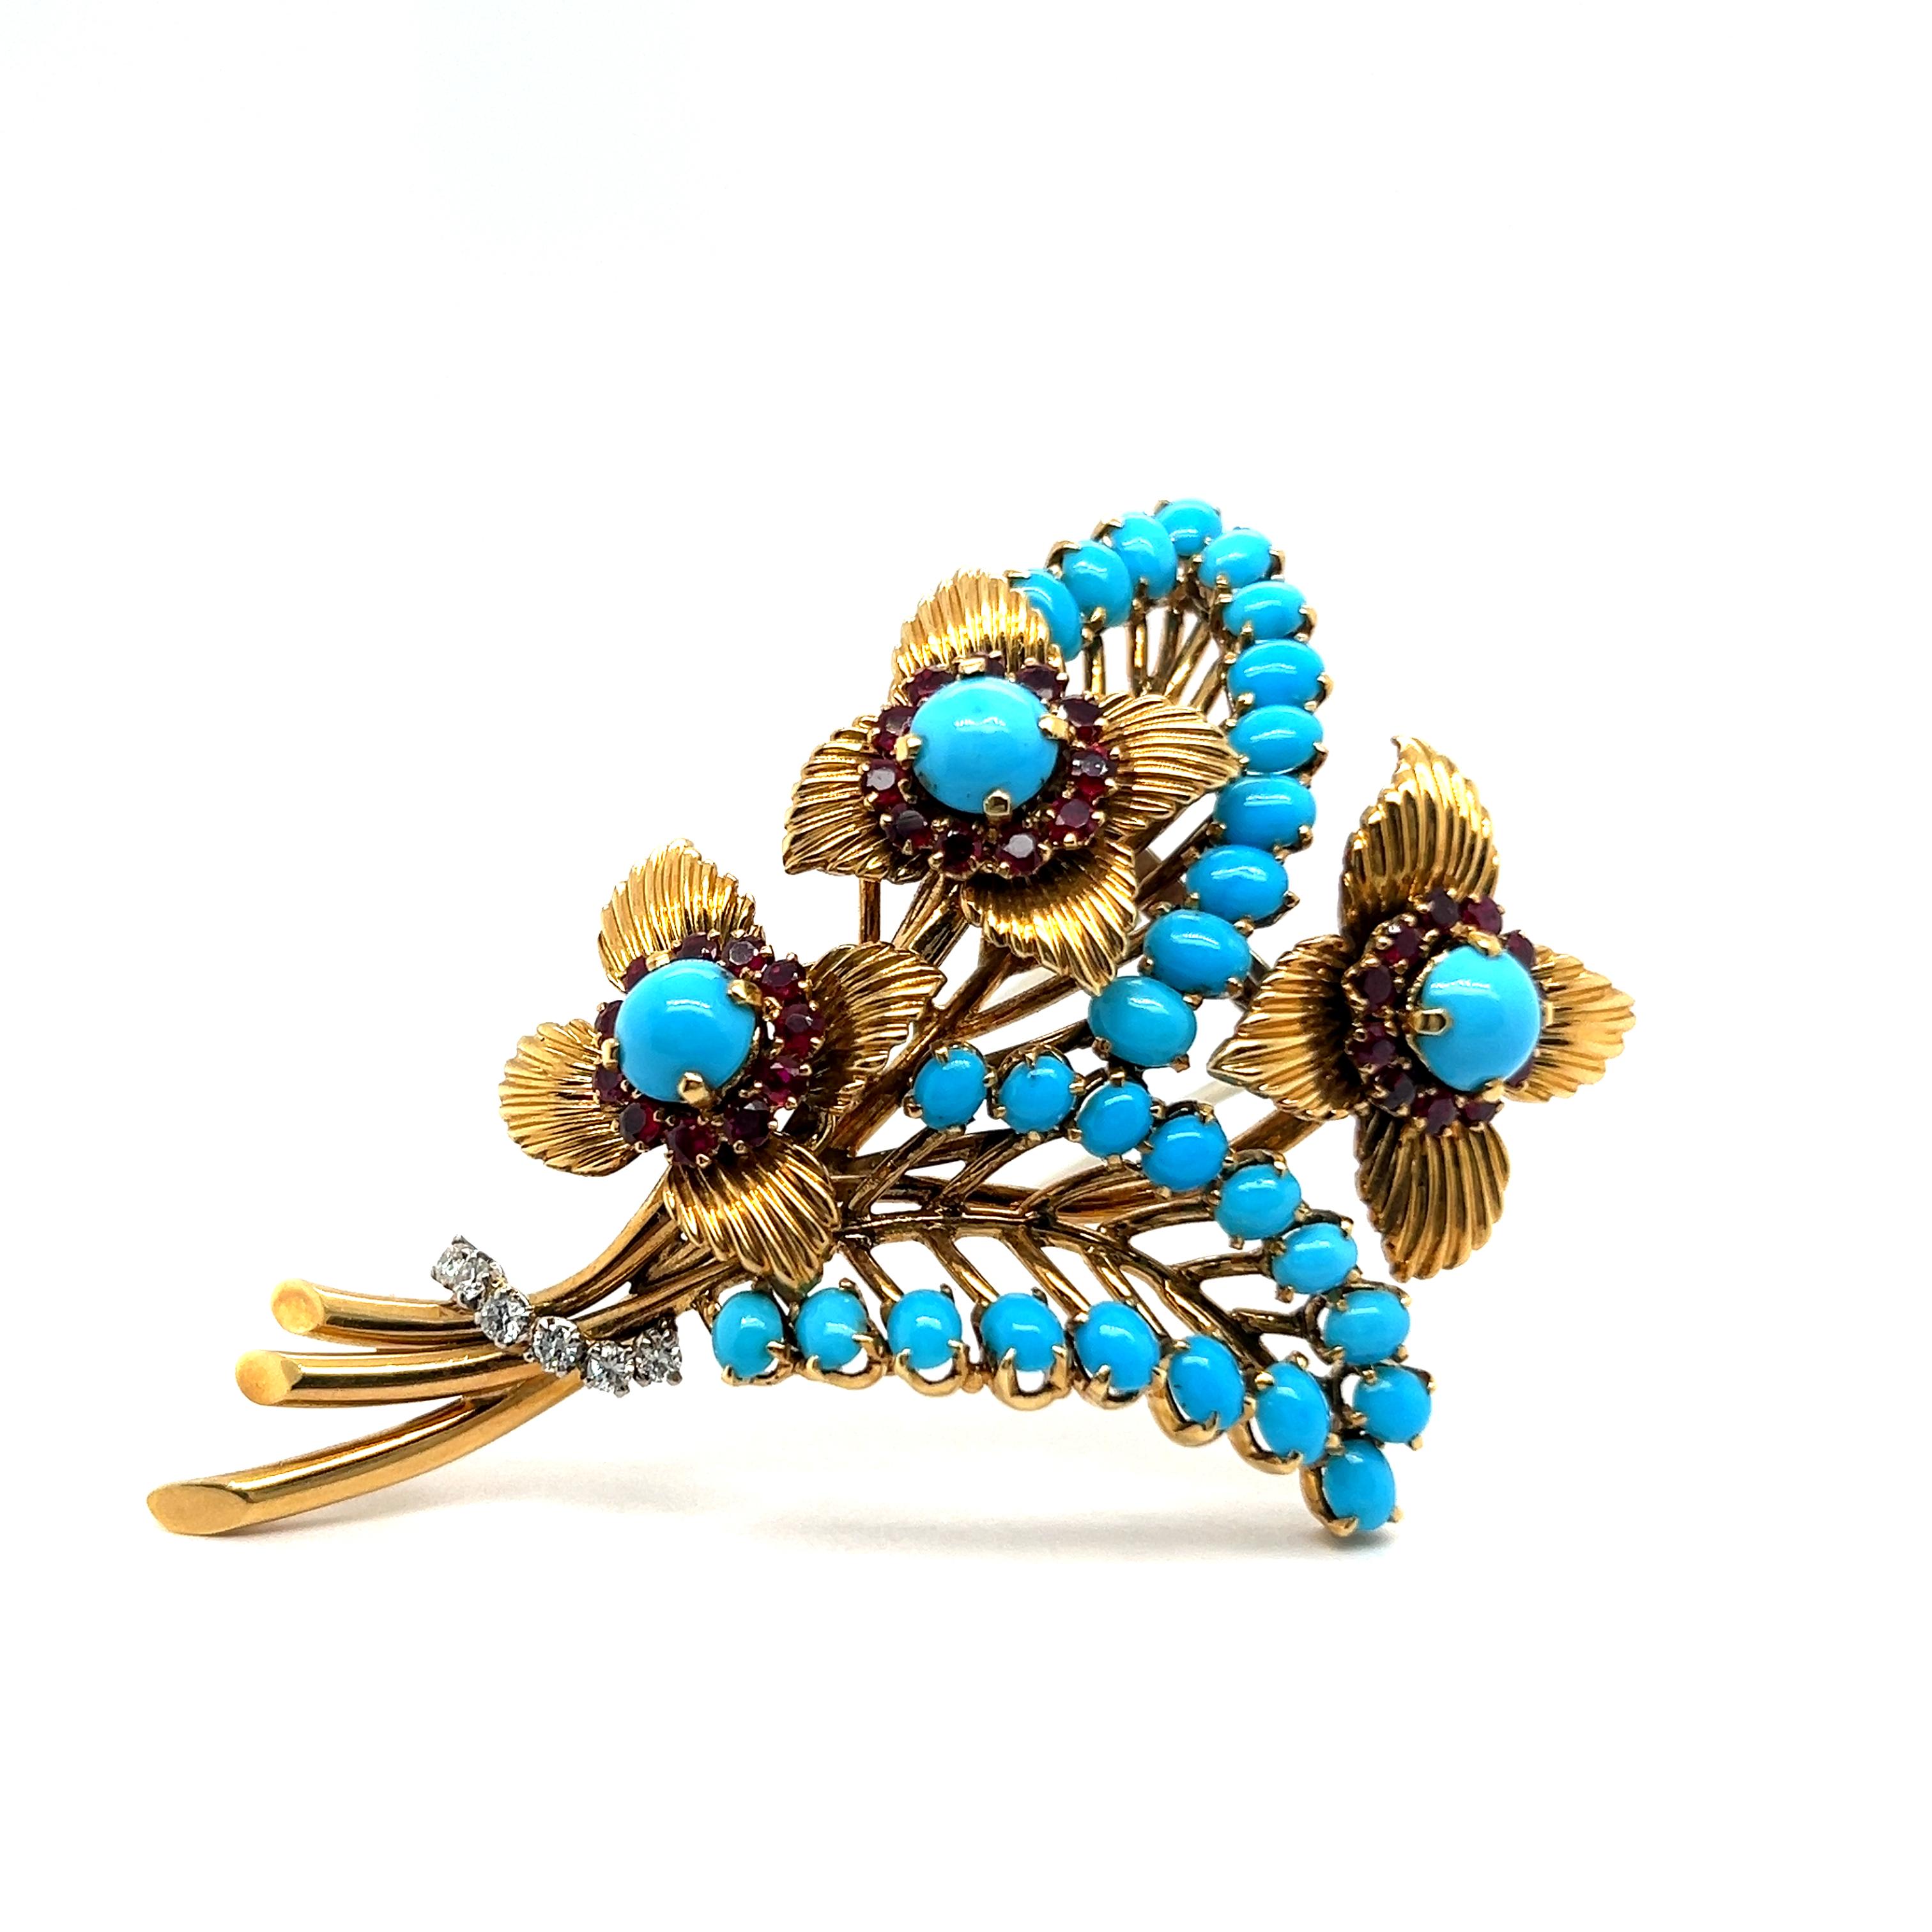 Brooch with Turquoise, Rubies & Diamonds in 18 Karat Yellow Gold by Gübelin For Sale 8